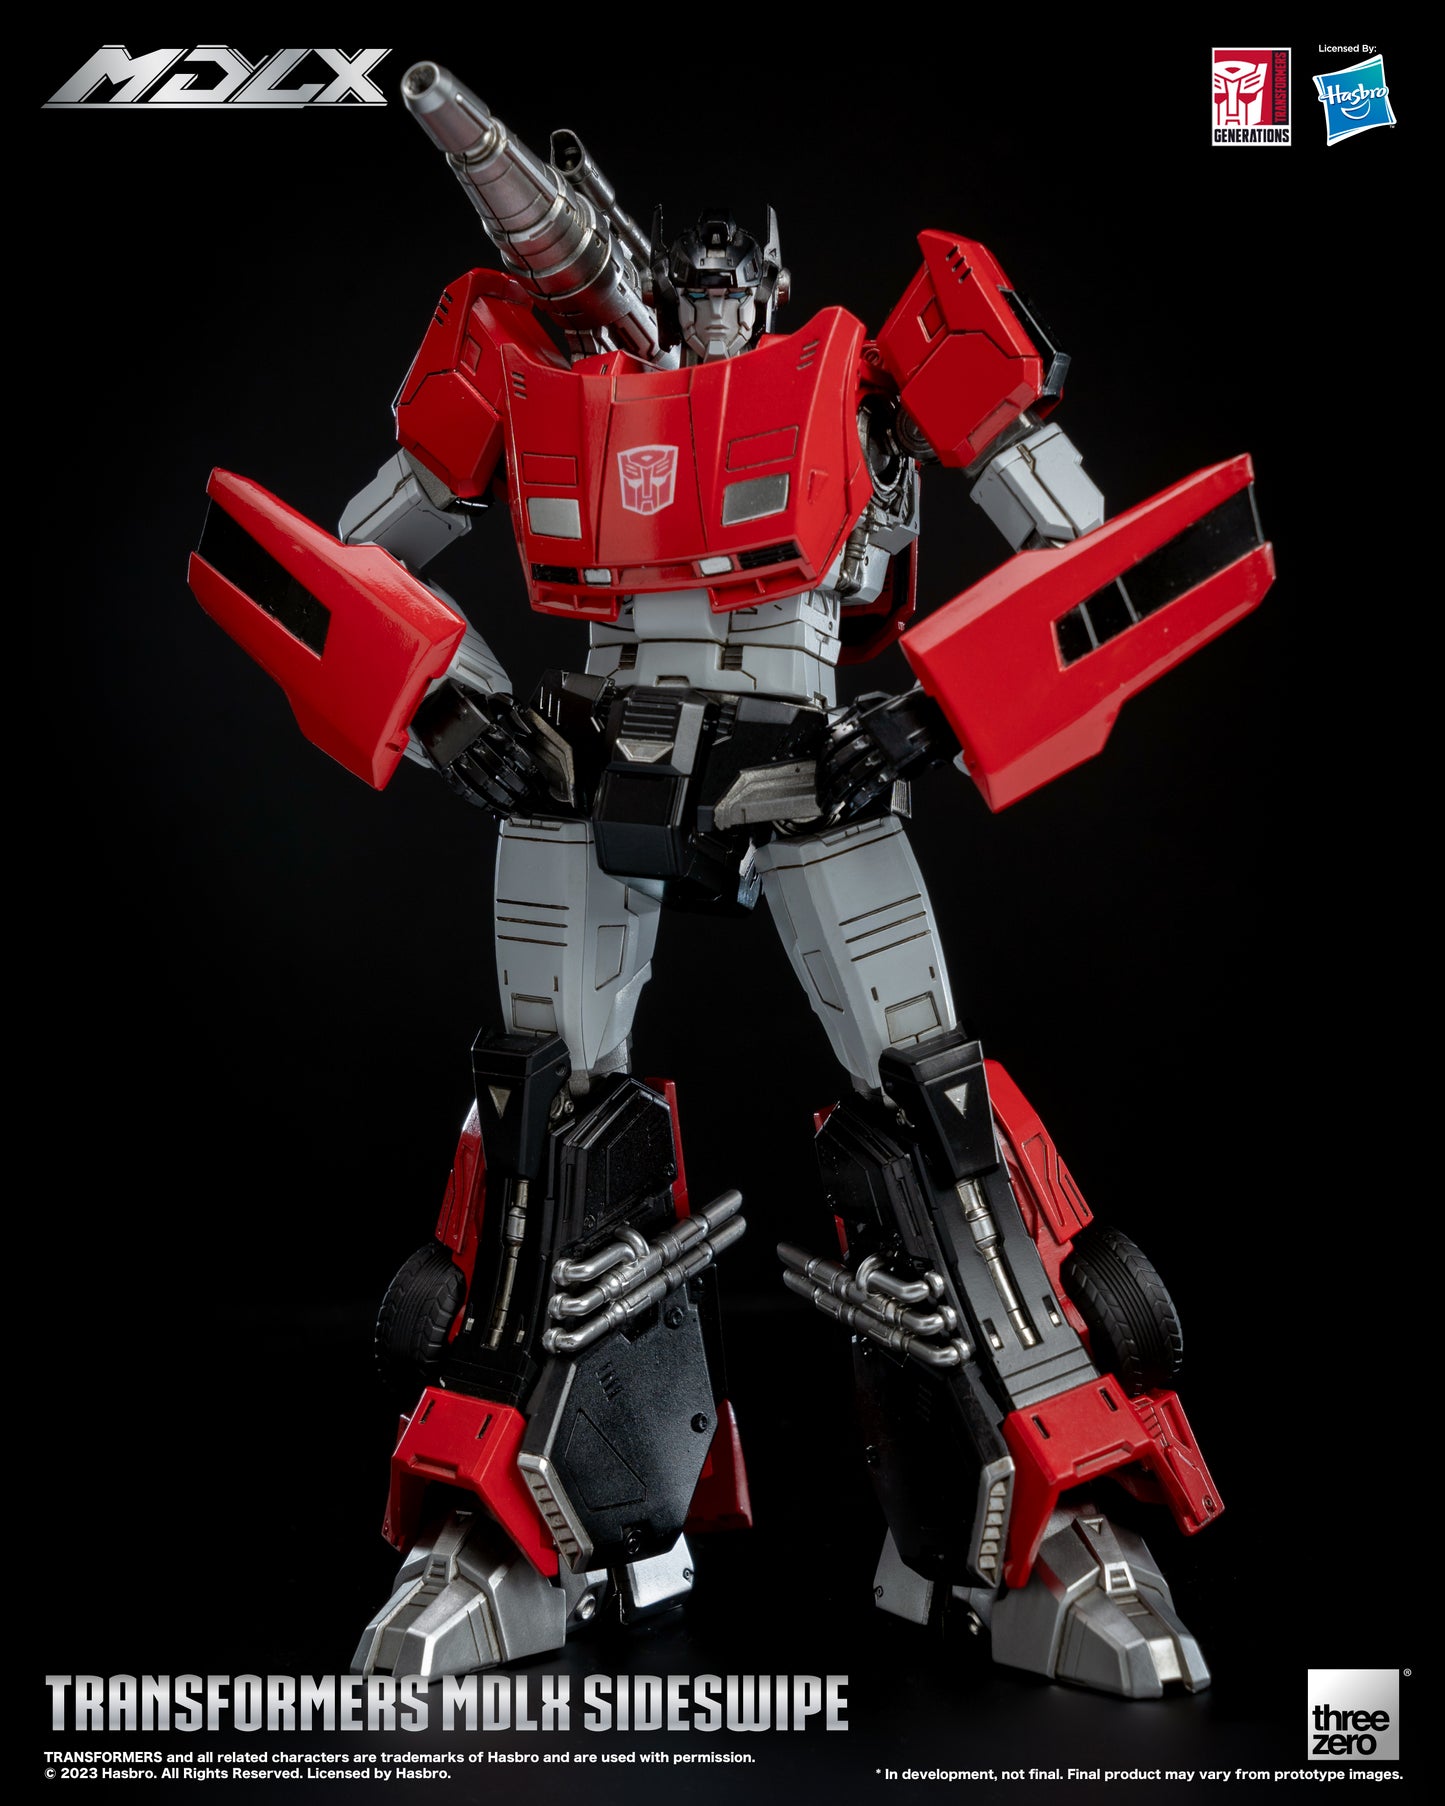 Sideswipe Transformers MDLX Action Figure Pre-order